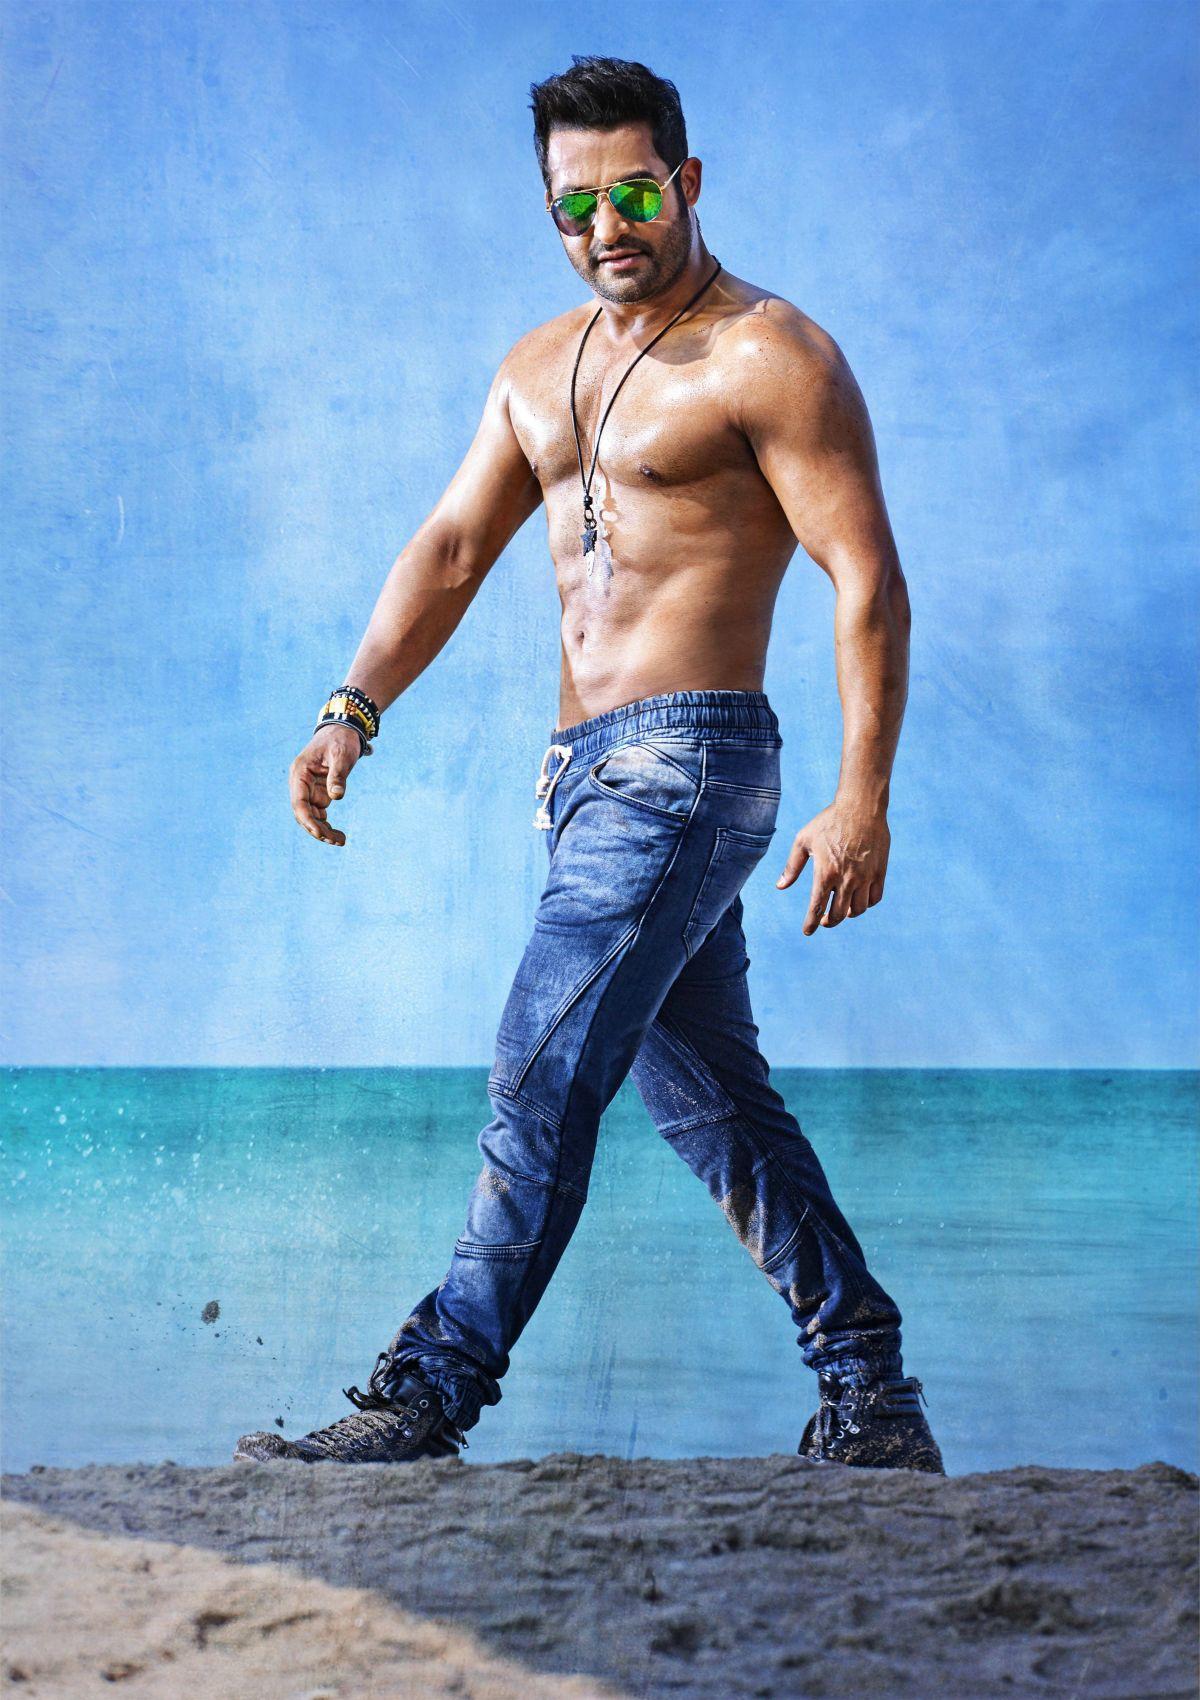 Jr Ntr HD Wallpaper For Android Apk